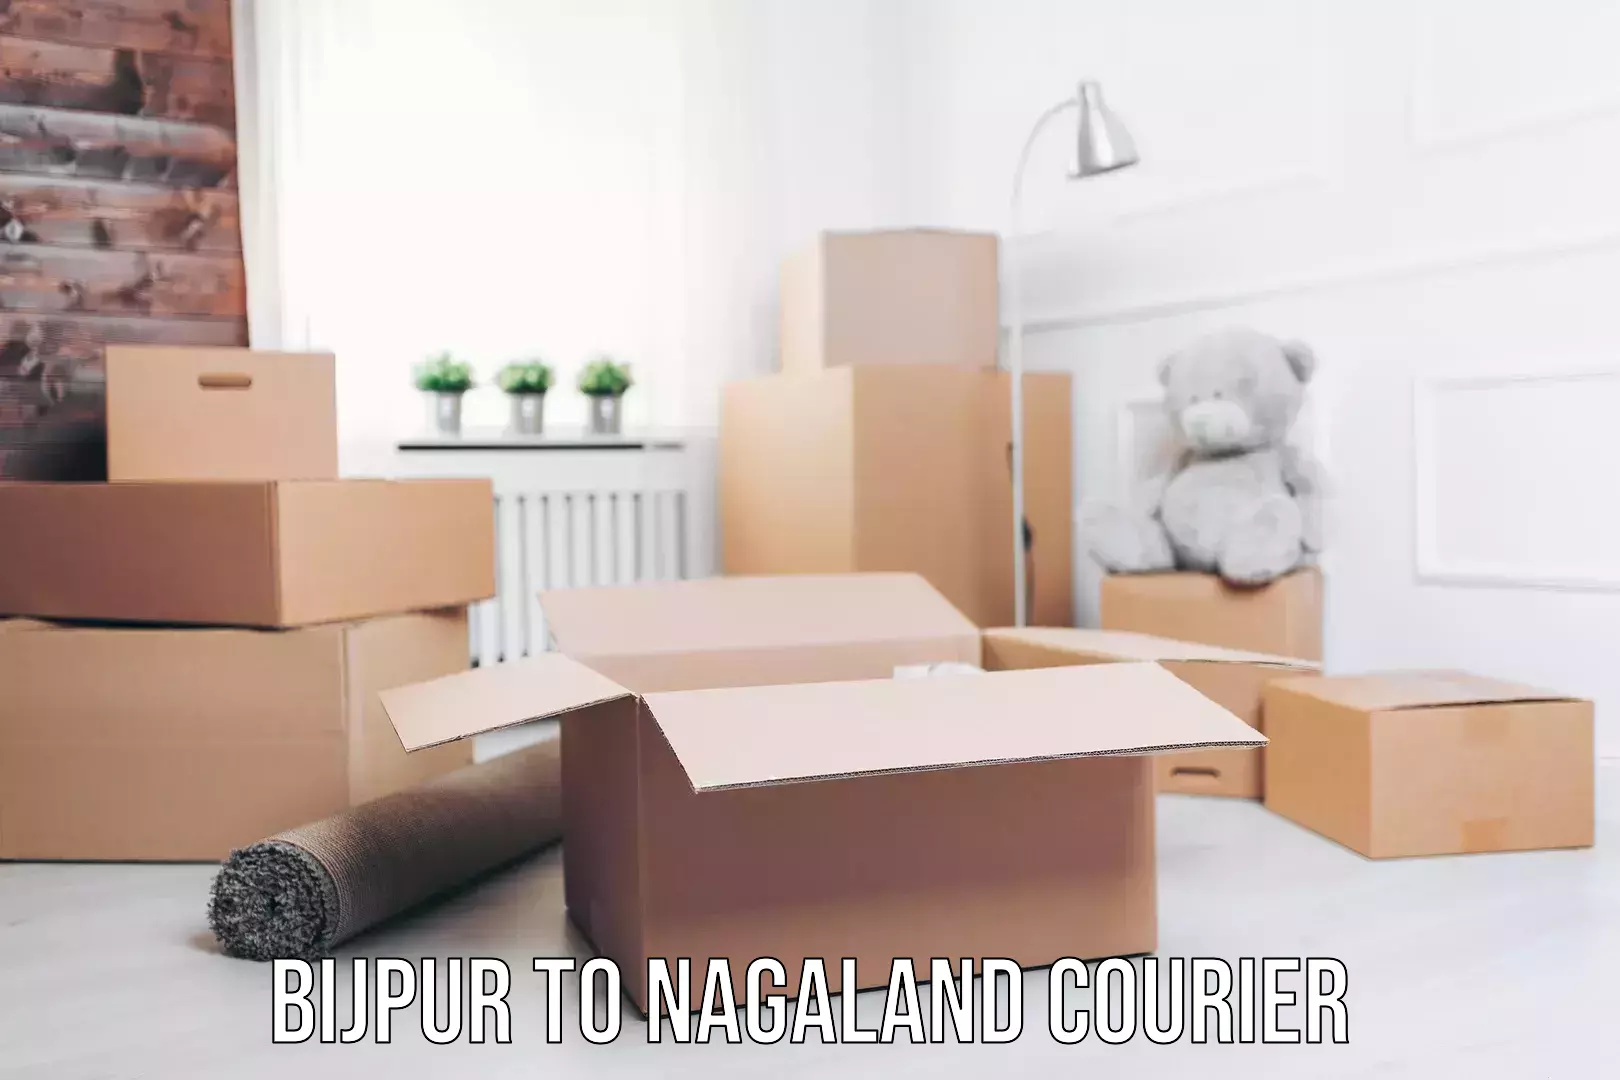 Rural area delivery in Bijpur to Nagaland